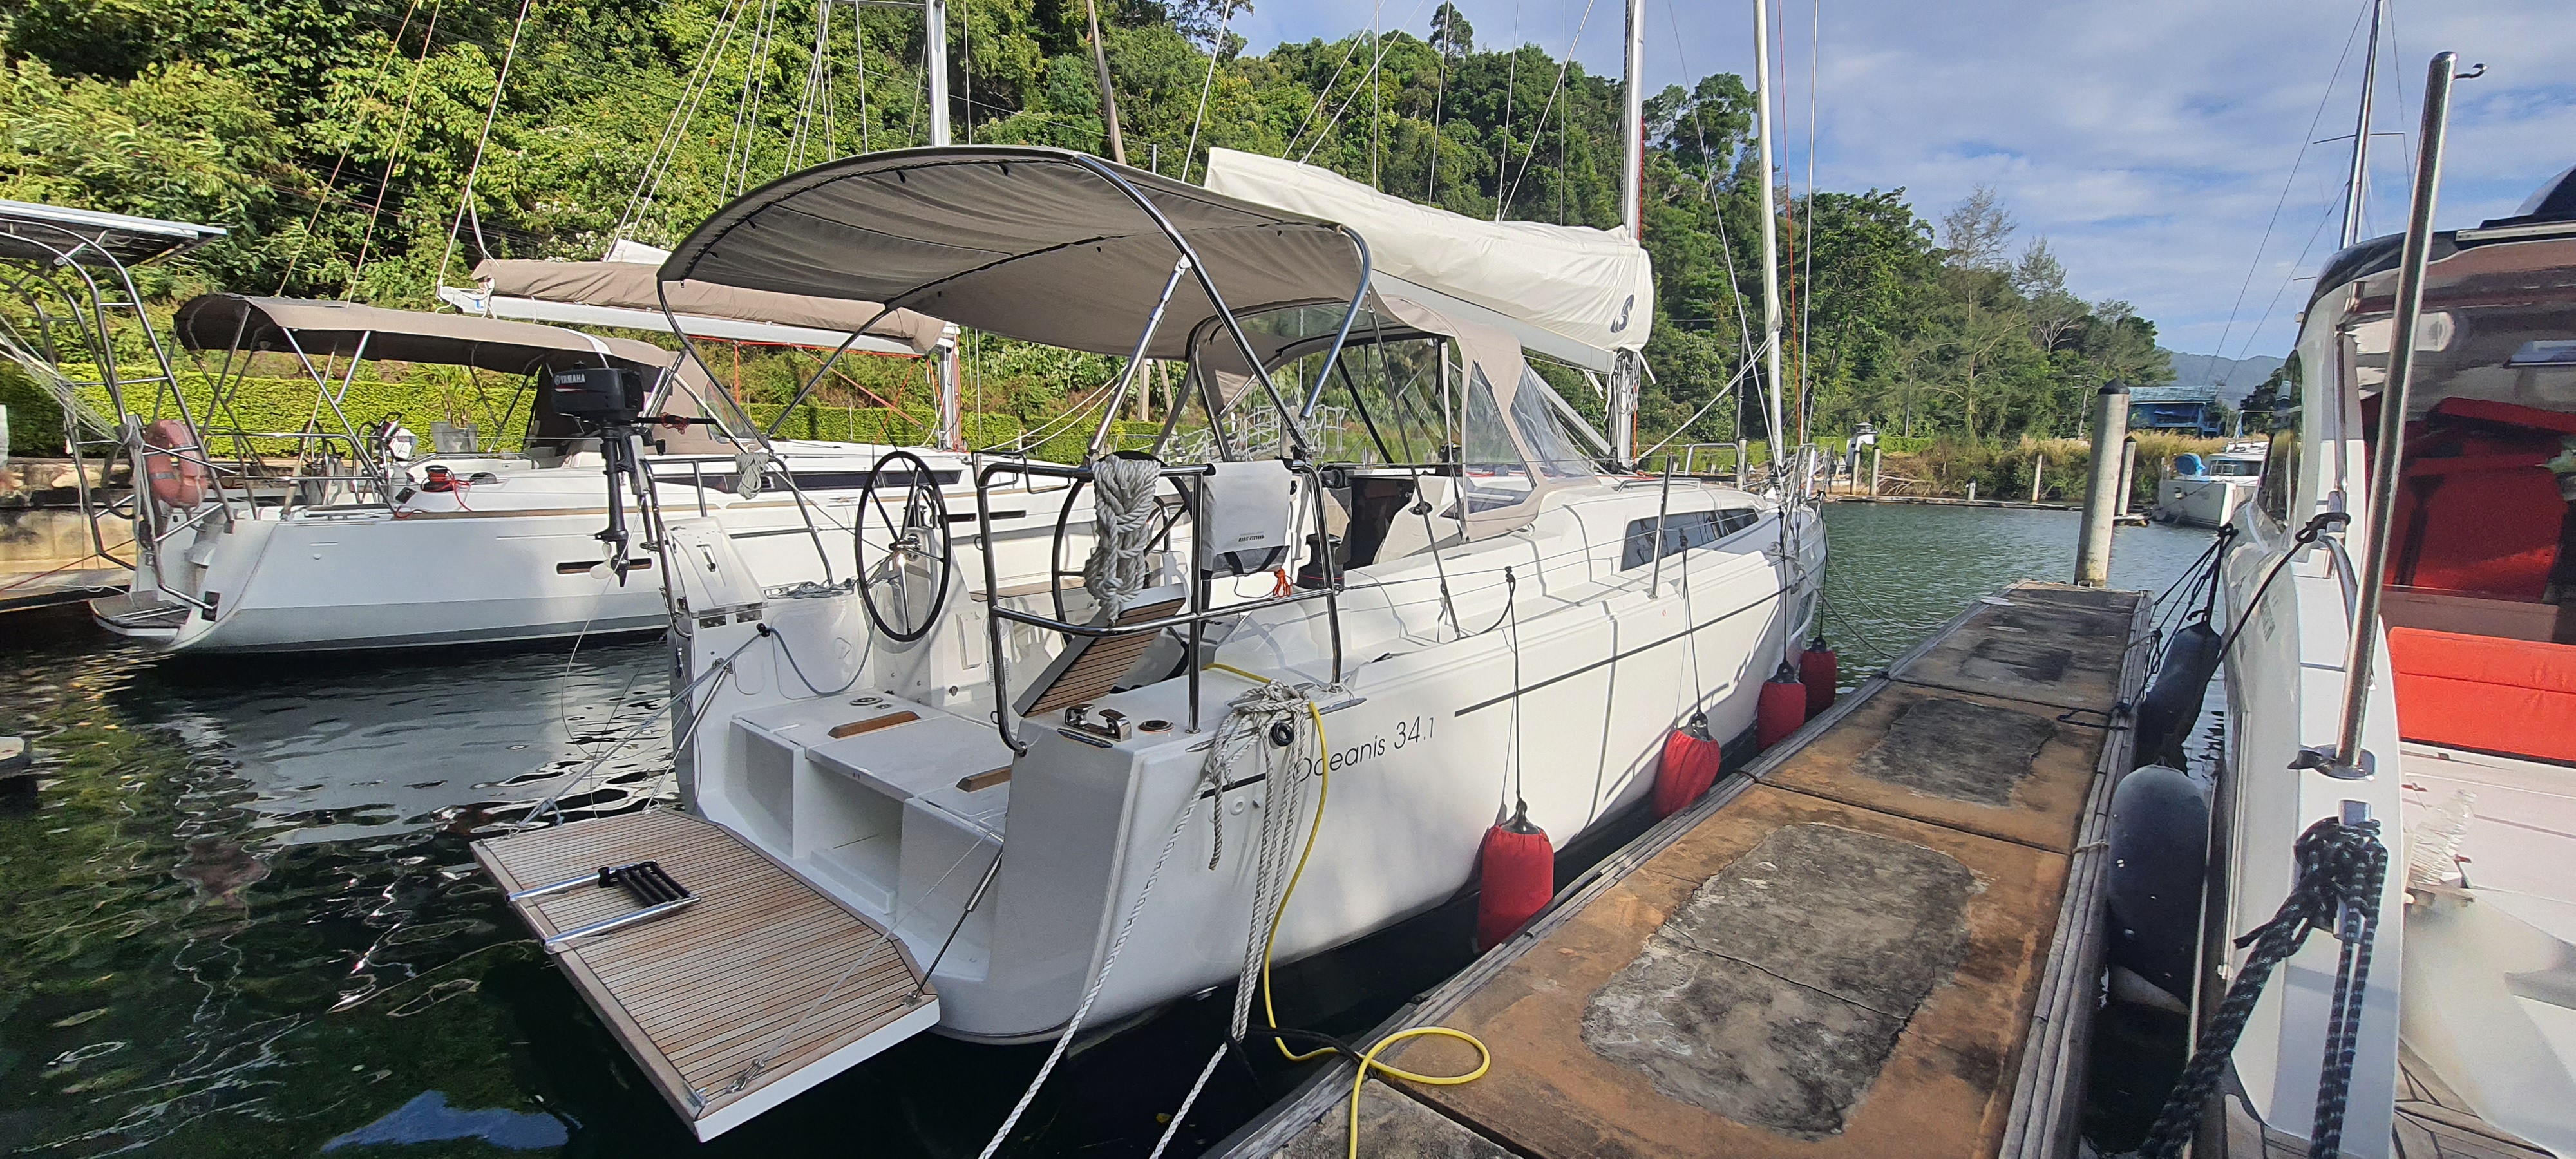 Oceanis 34.1 - Sailboat Charter Thailand & Boat hire in Thailand Koh Chang Ao Salak Phet 4